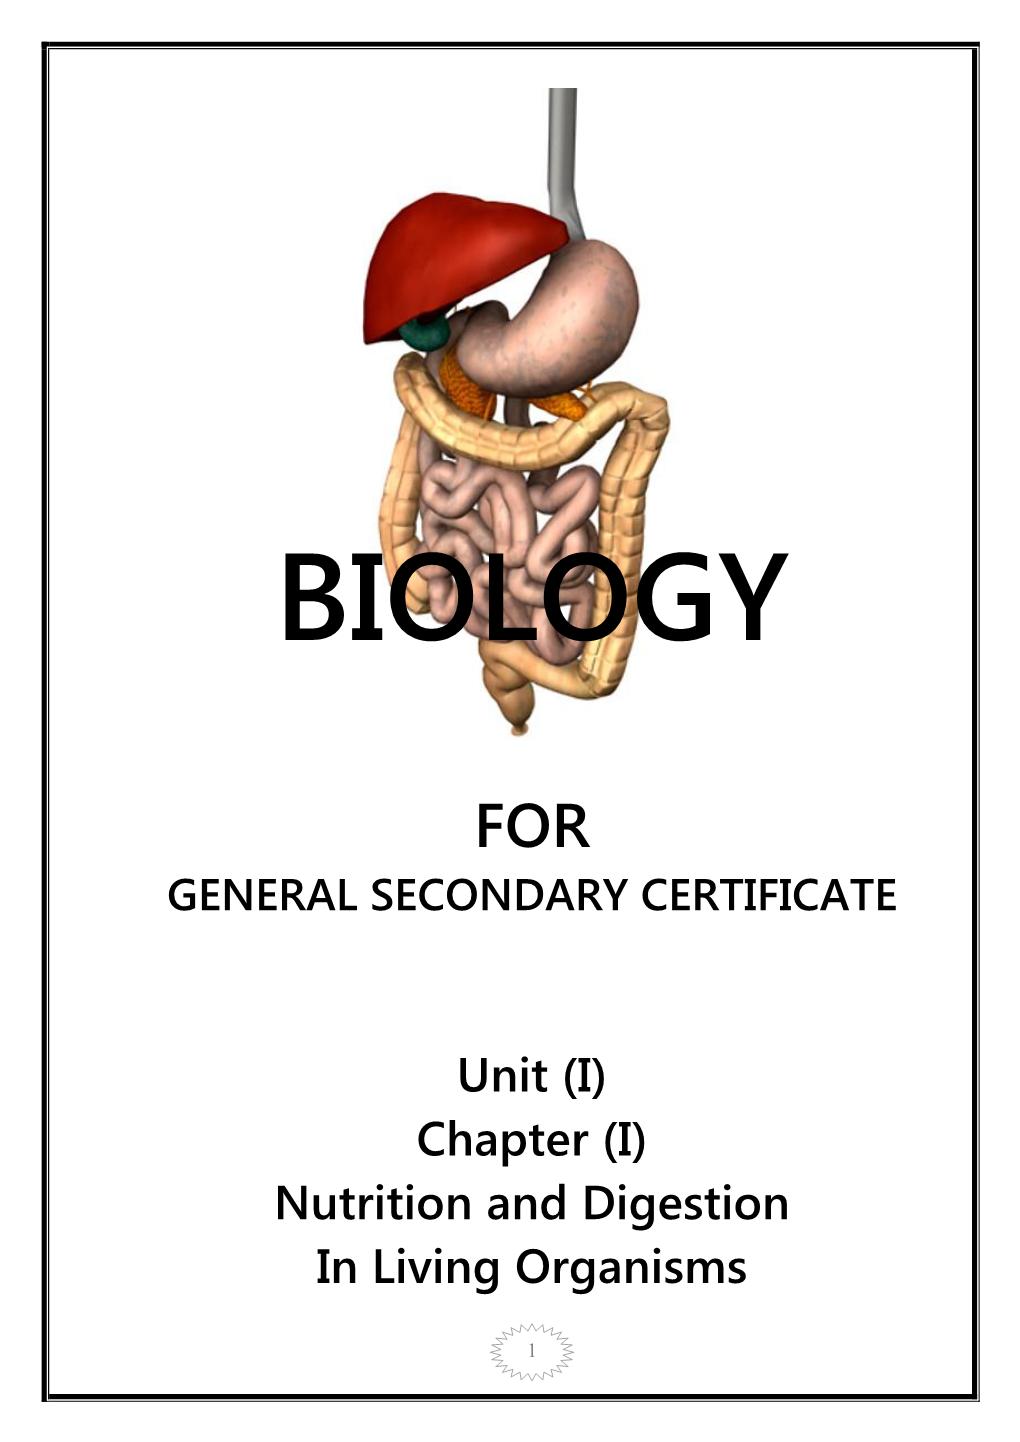 Unit (I) Chapter (I) Nutrition and Digestion in Living Organisms